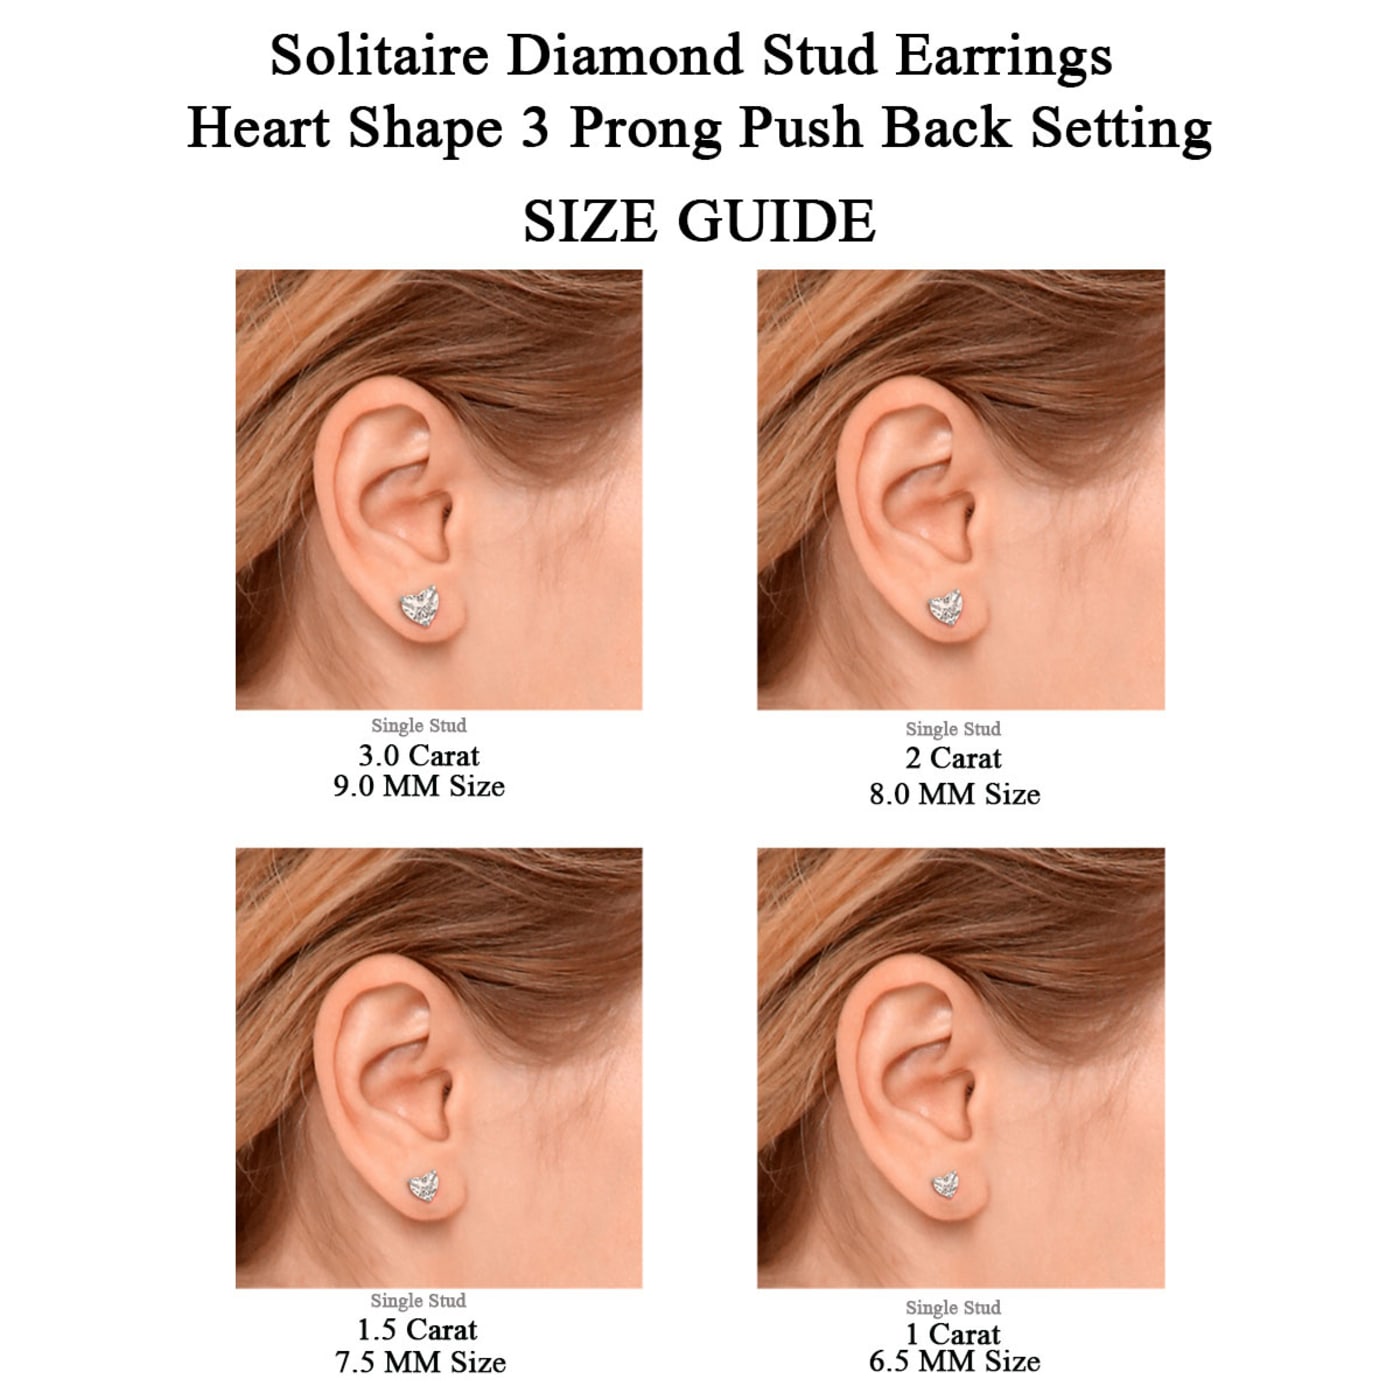 The Complete Guide to Stud Earring Sizes – From Tiny to Huge